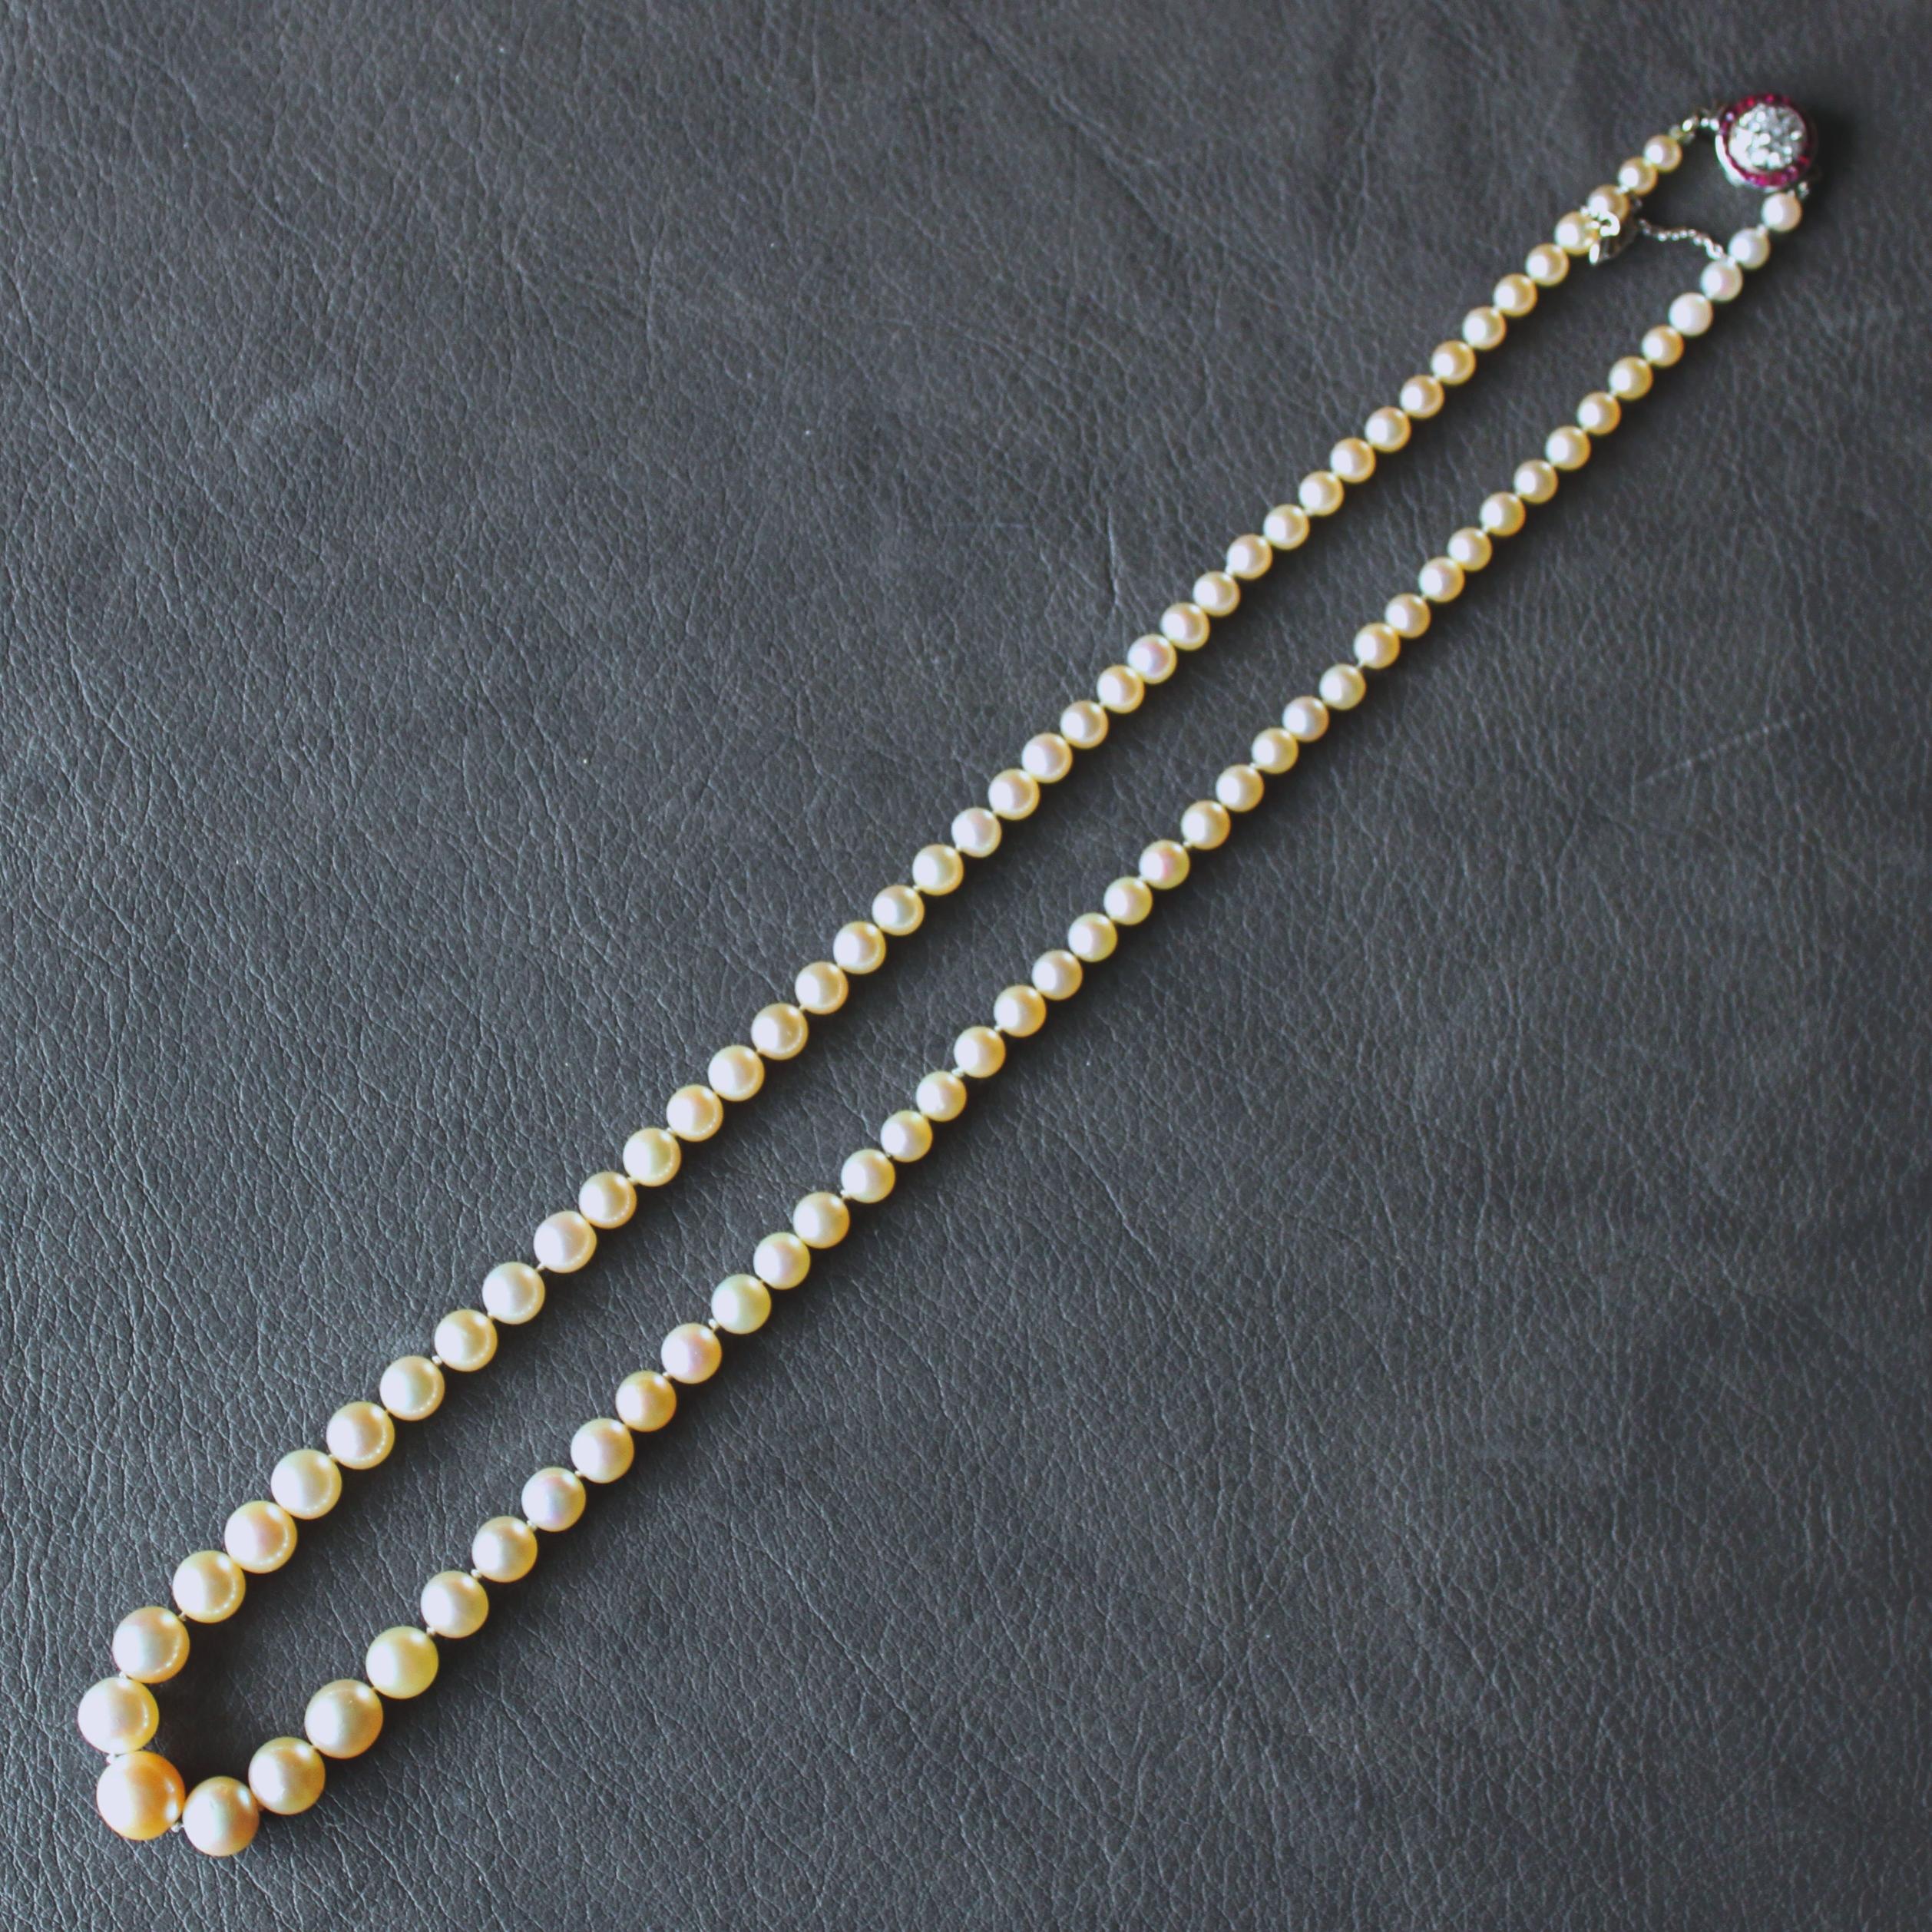 Round Cut Natural Saltwater Pearl Necklace, circa 1920s